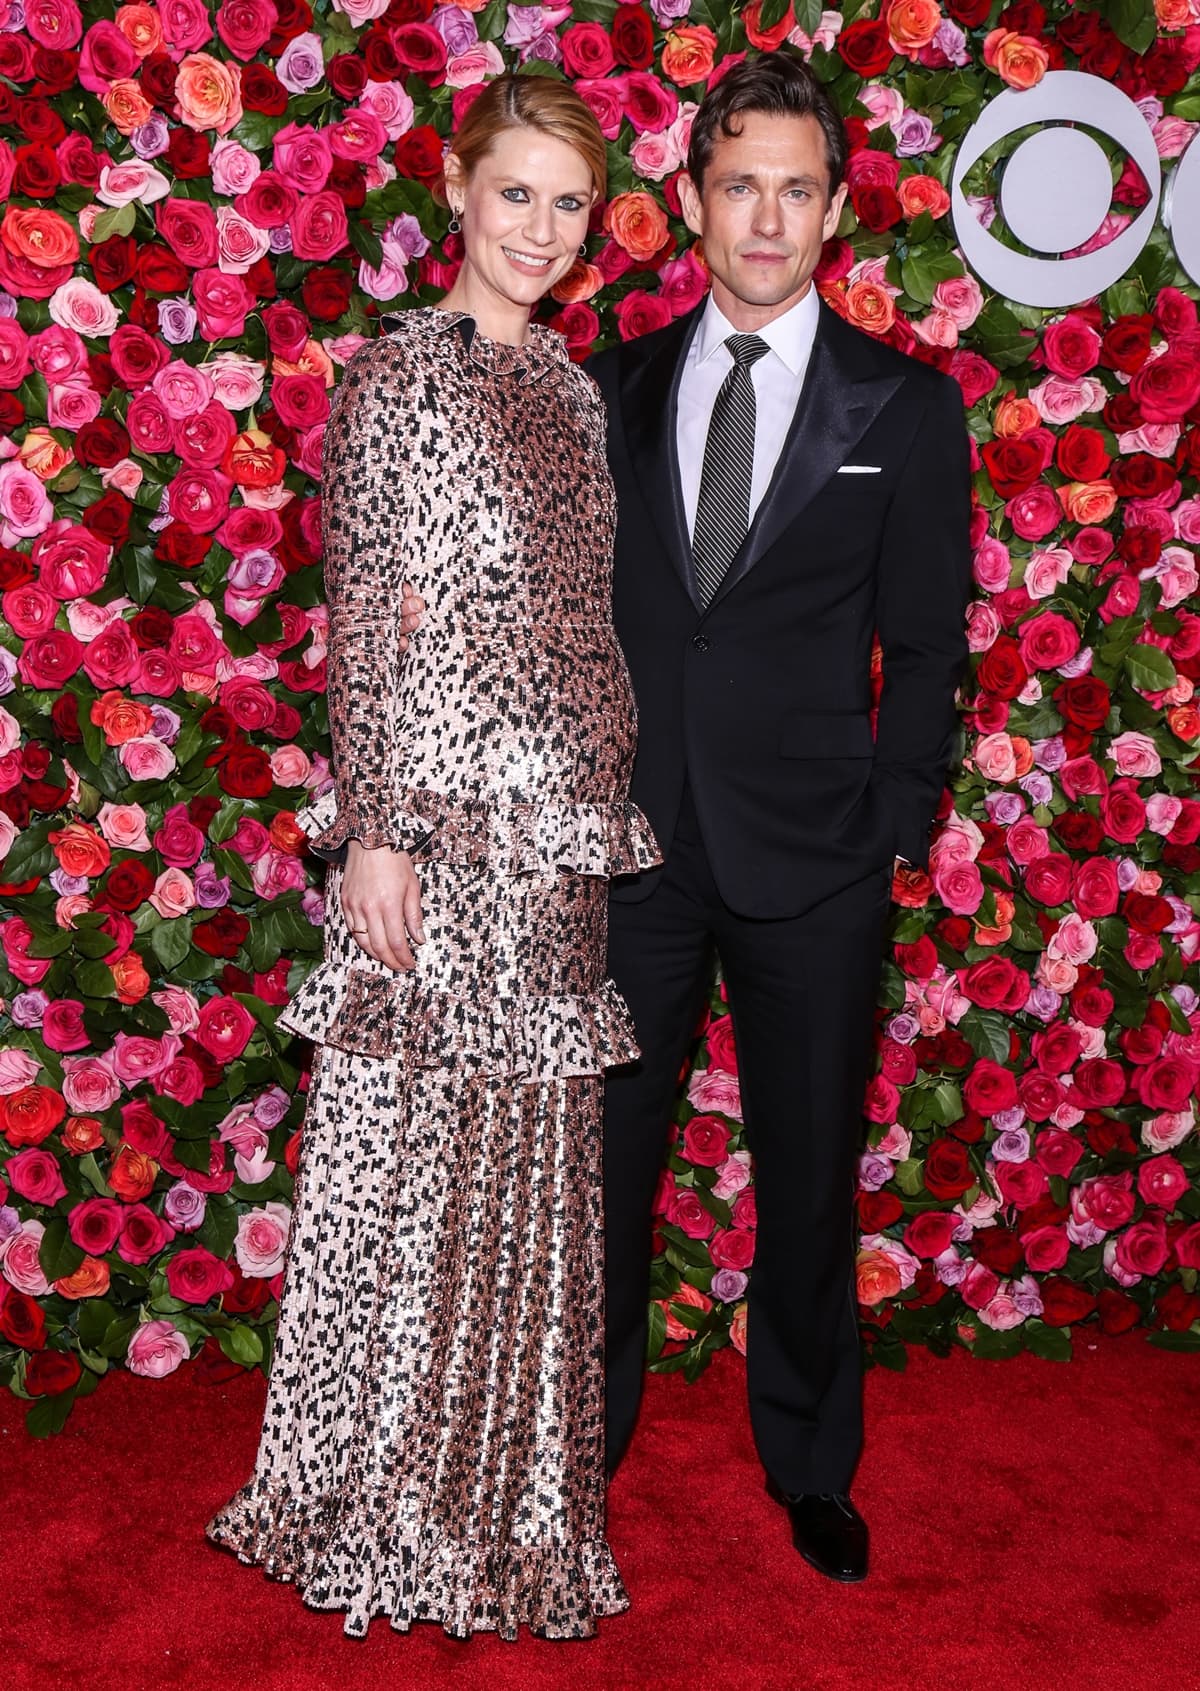 Claire Danes shows off her baby bump in a Valentino dress and Jimmy Choo shoes with her husband Hugh Dancy at the 2018 Tony Awards